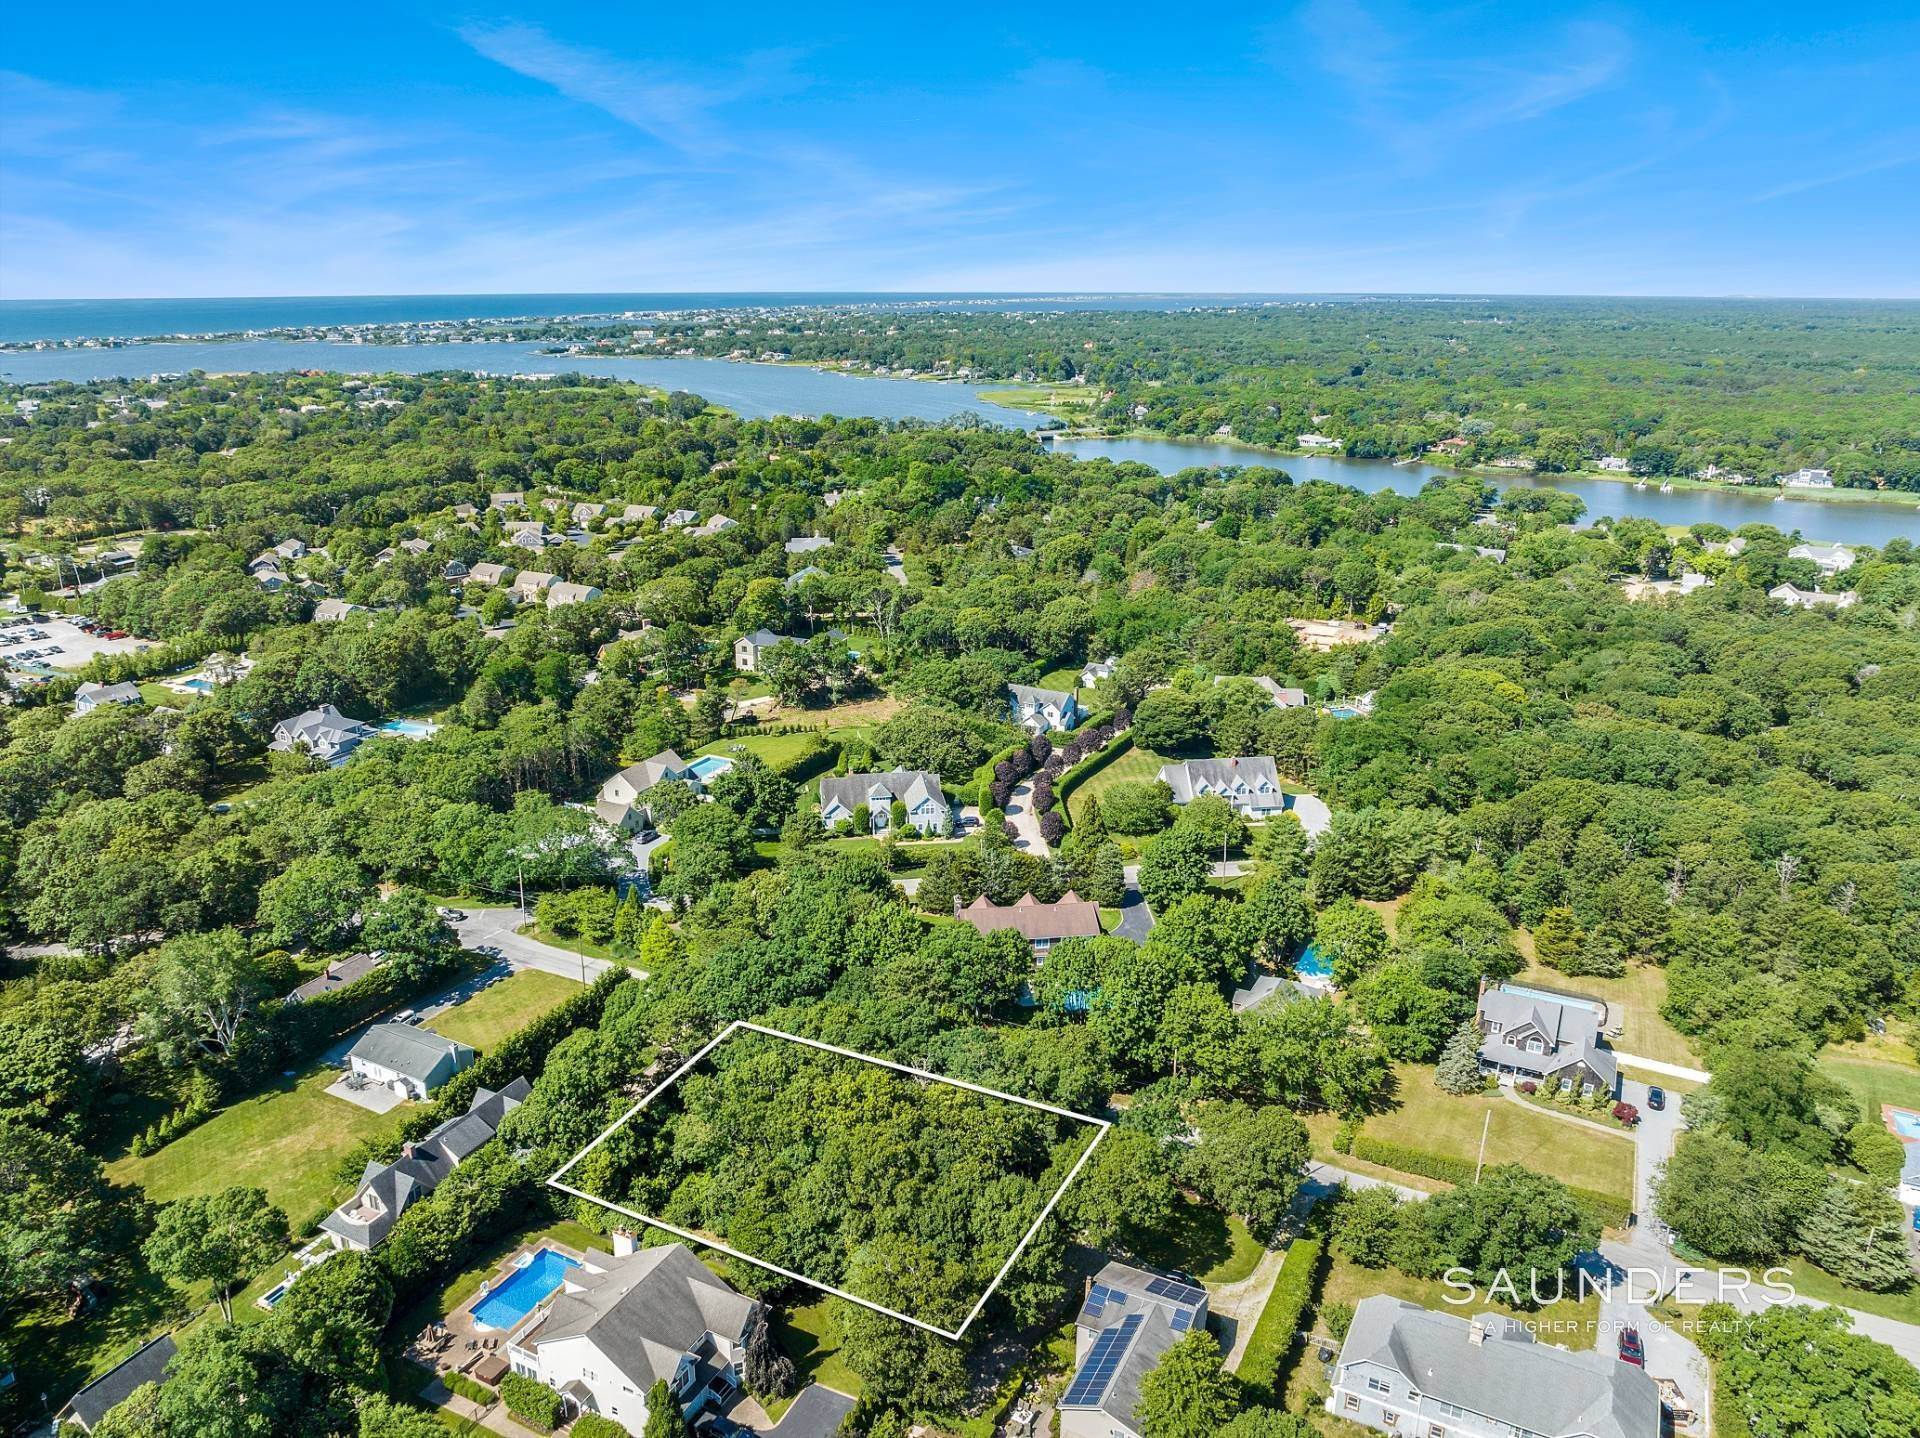 Single Family Homes for Sale at New Construction With Saltwater Pool In Desirable Quogue Village 46 Jessup Avenue, Quogue, NY 11959